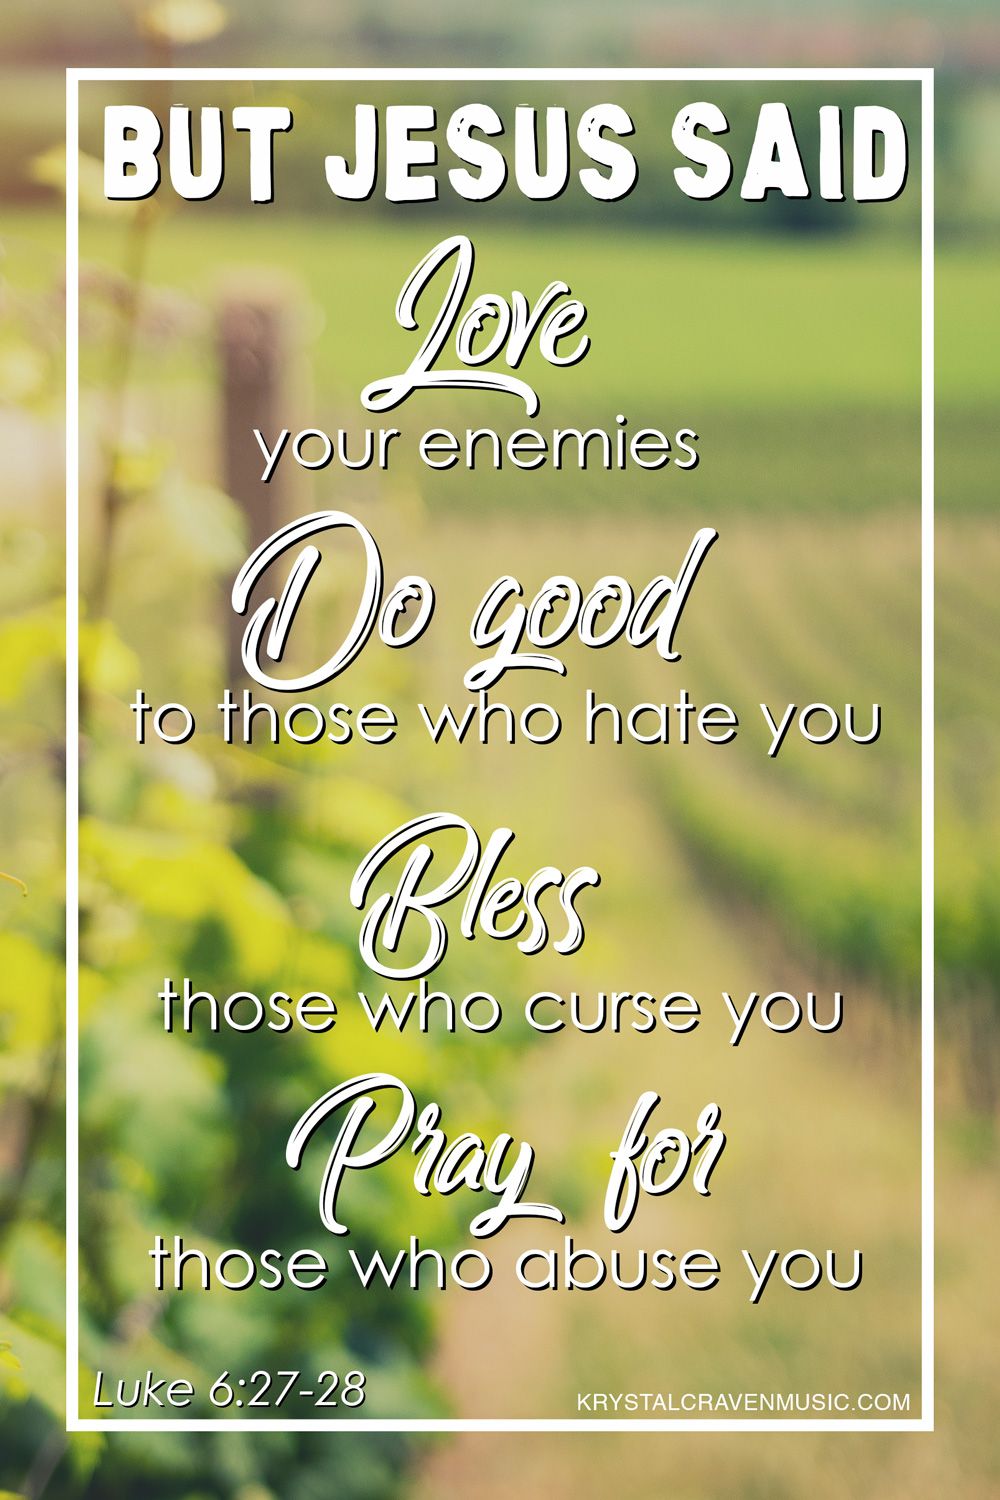 The text "But Jesus said love your enemies, do good to those who hate you, bless those who curse you, pray for those who abuse you. Luke 6:27-28. Overlaying a blurry image of a vineyard landscape during sunset.